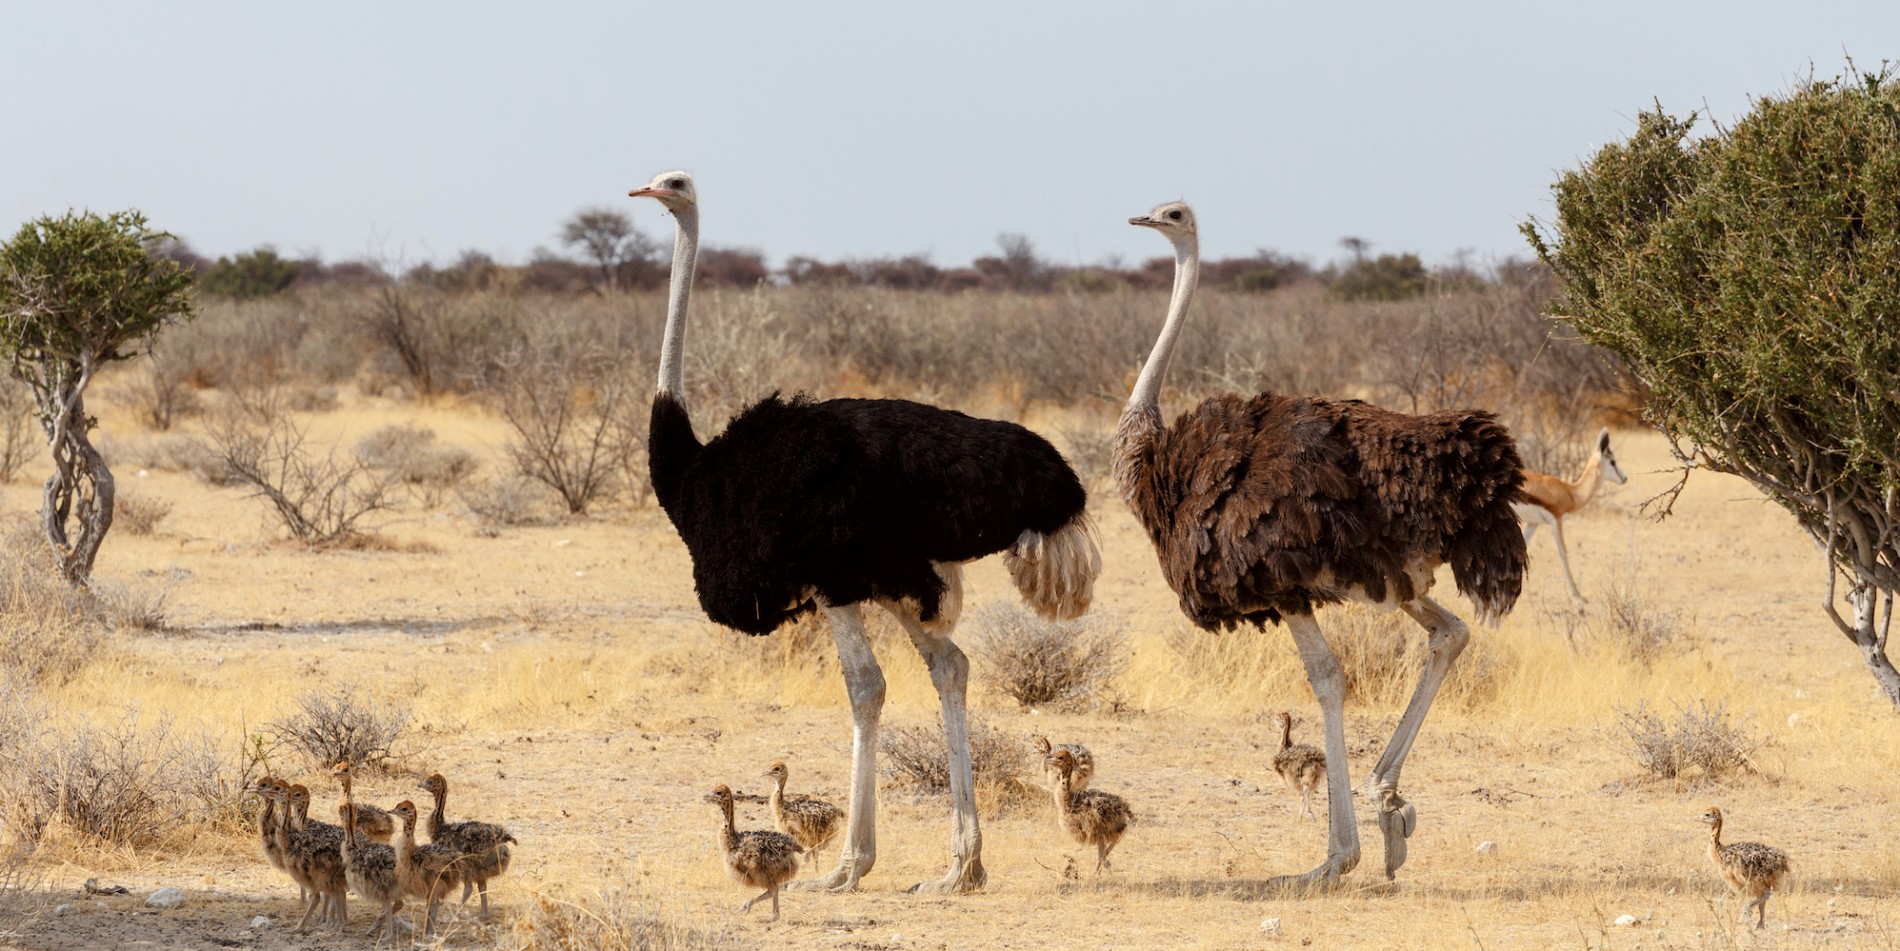 Two fully grown ostriches standing over many of their babies in the Namibia desert